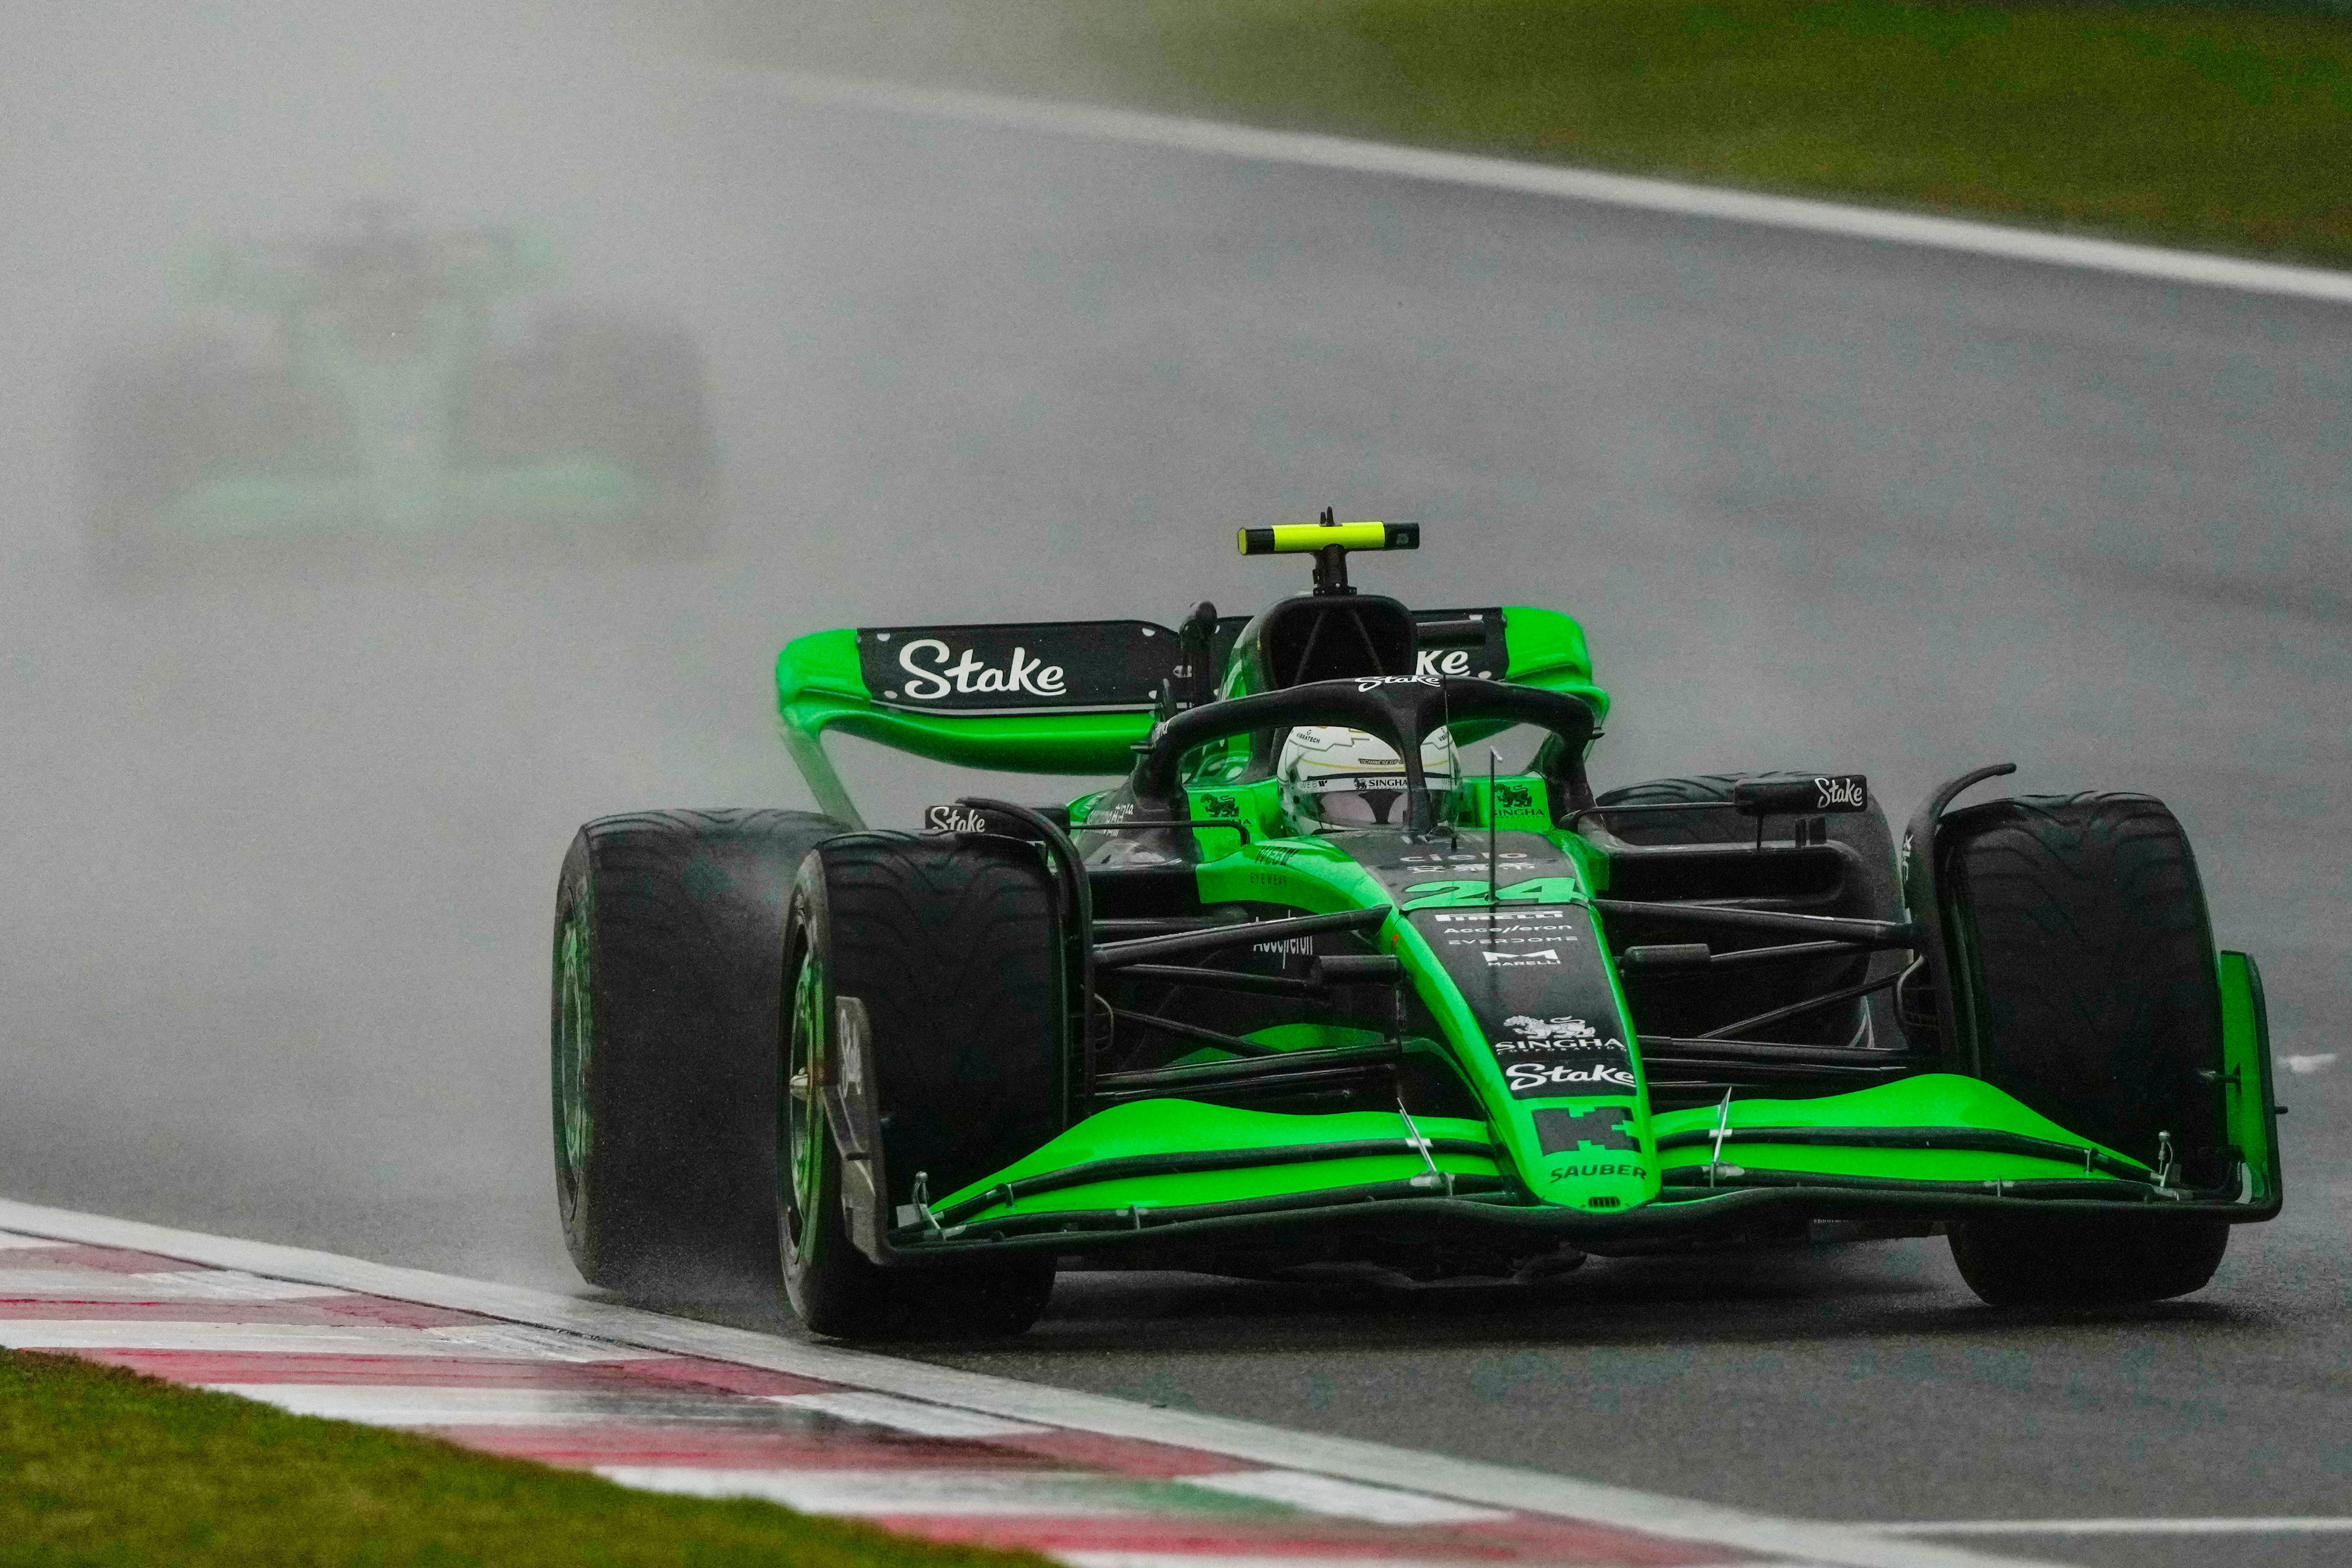 lando norris overcomes rain and fire to take chaotic sprint race pole at chinese grand prix